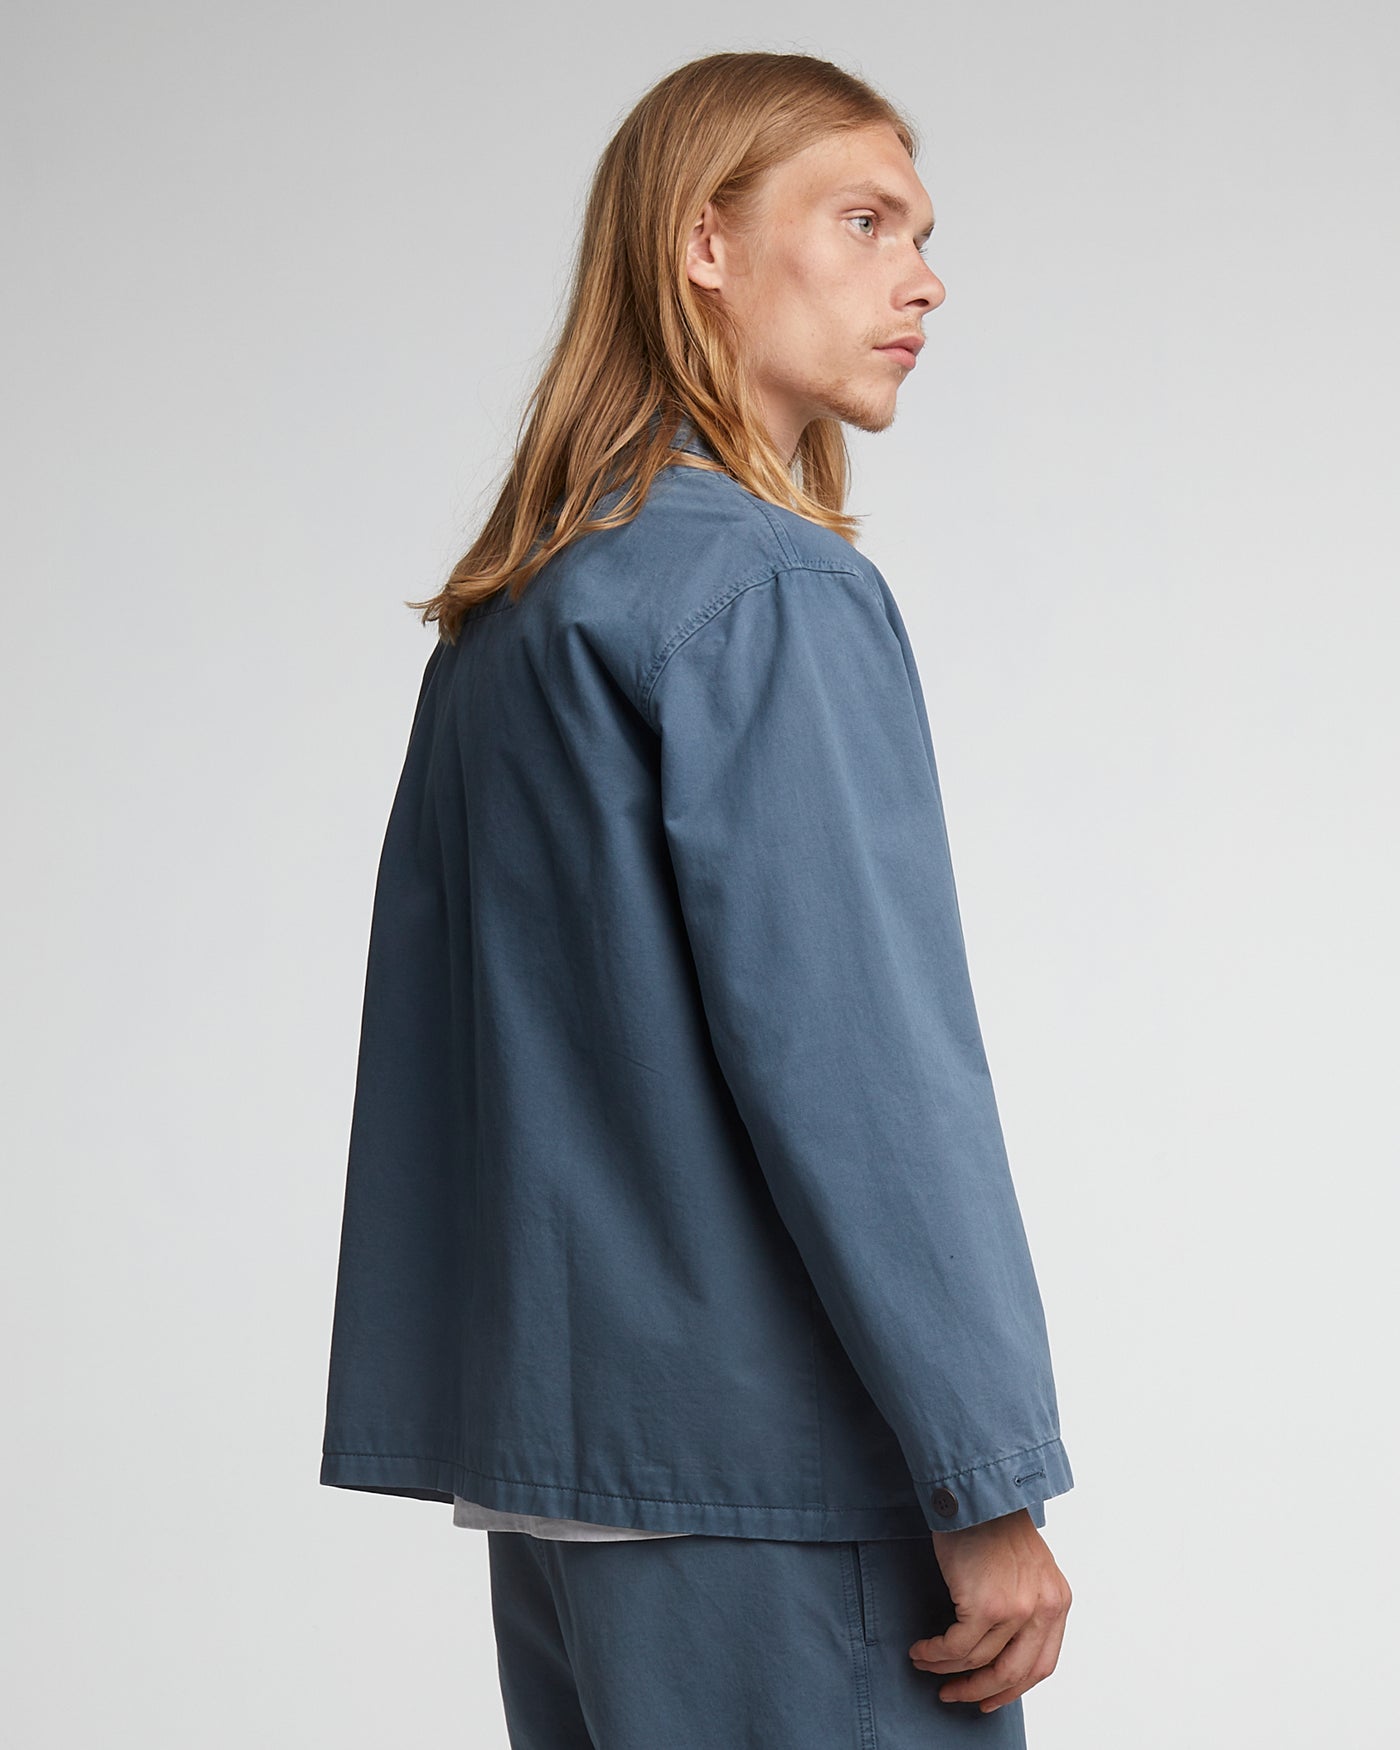 Coach Jacket Recycled Cotton Blue Mirage